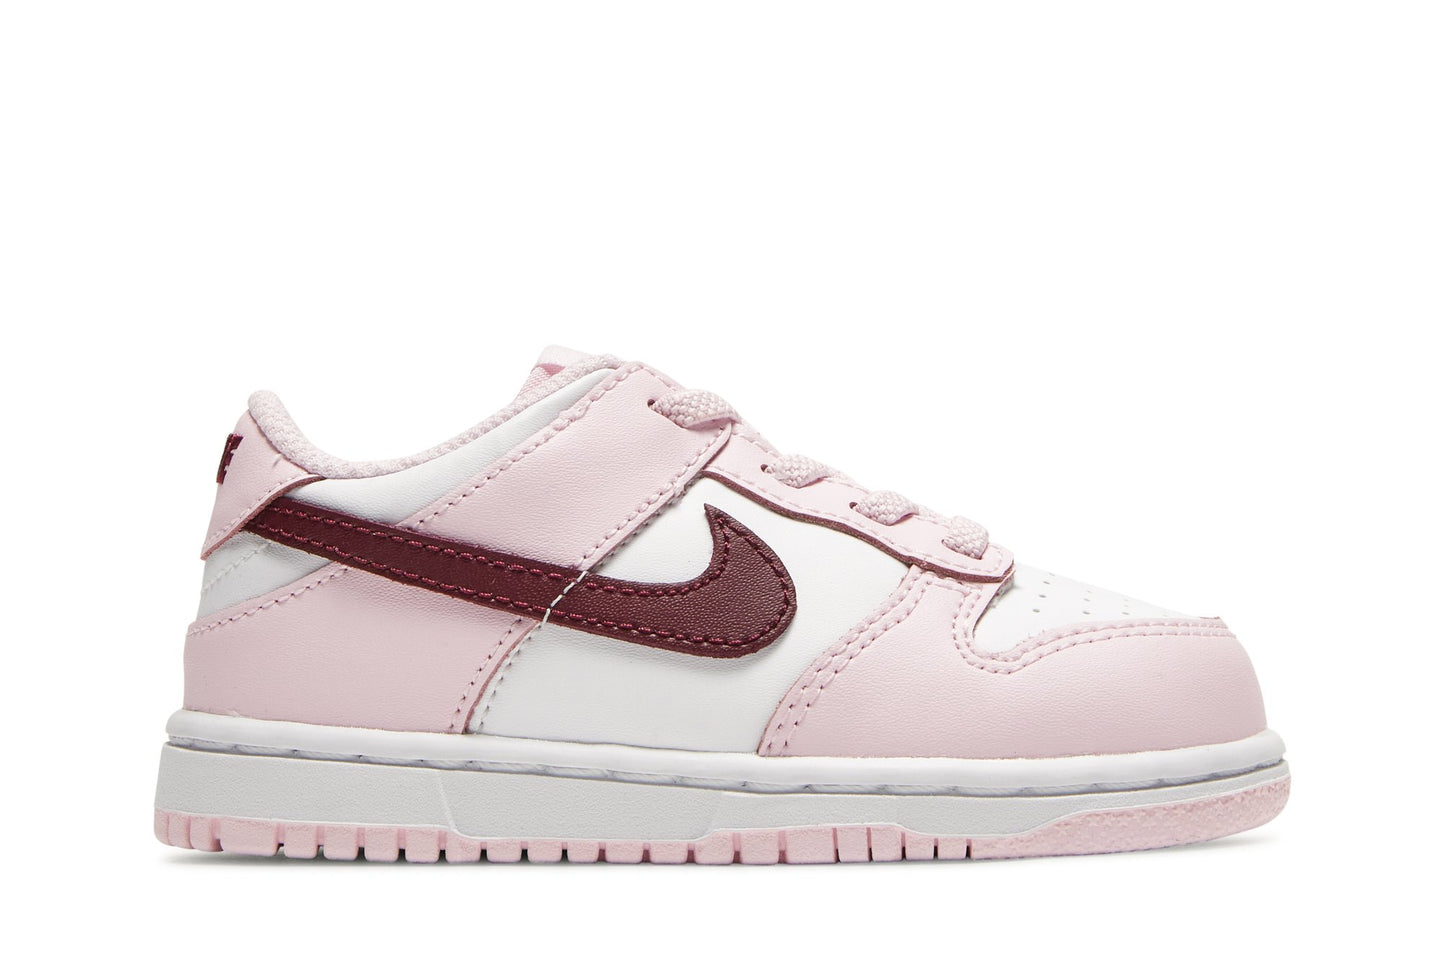 Dunk Low PS 'Valentine's Day' CW1588-601